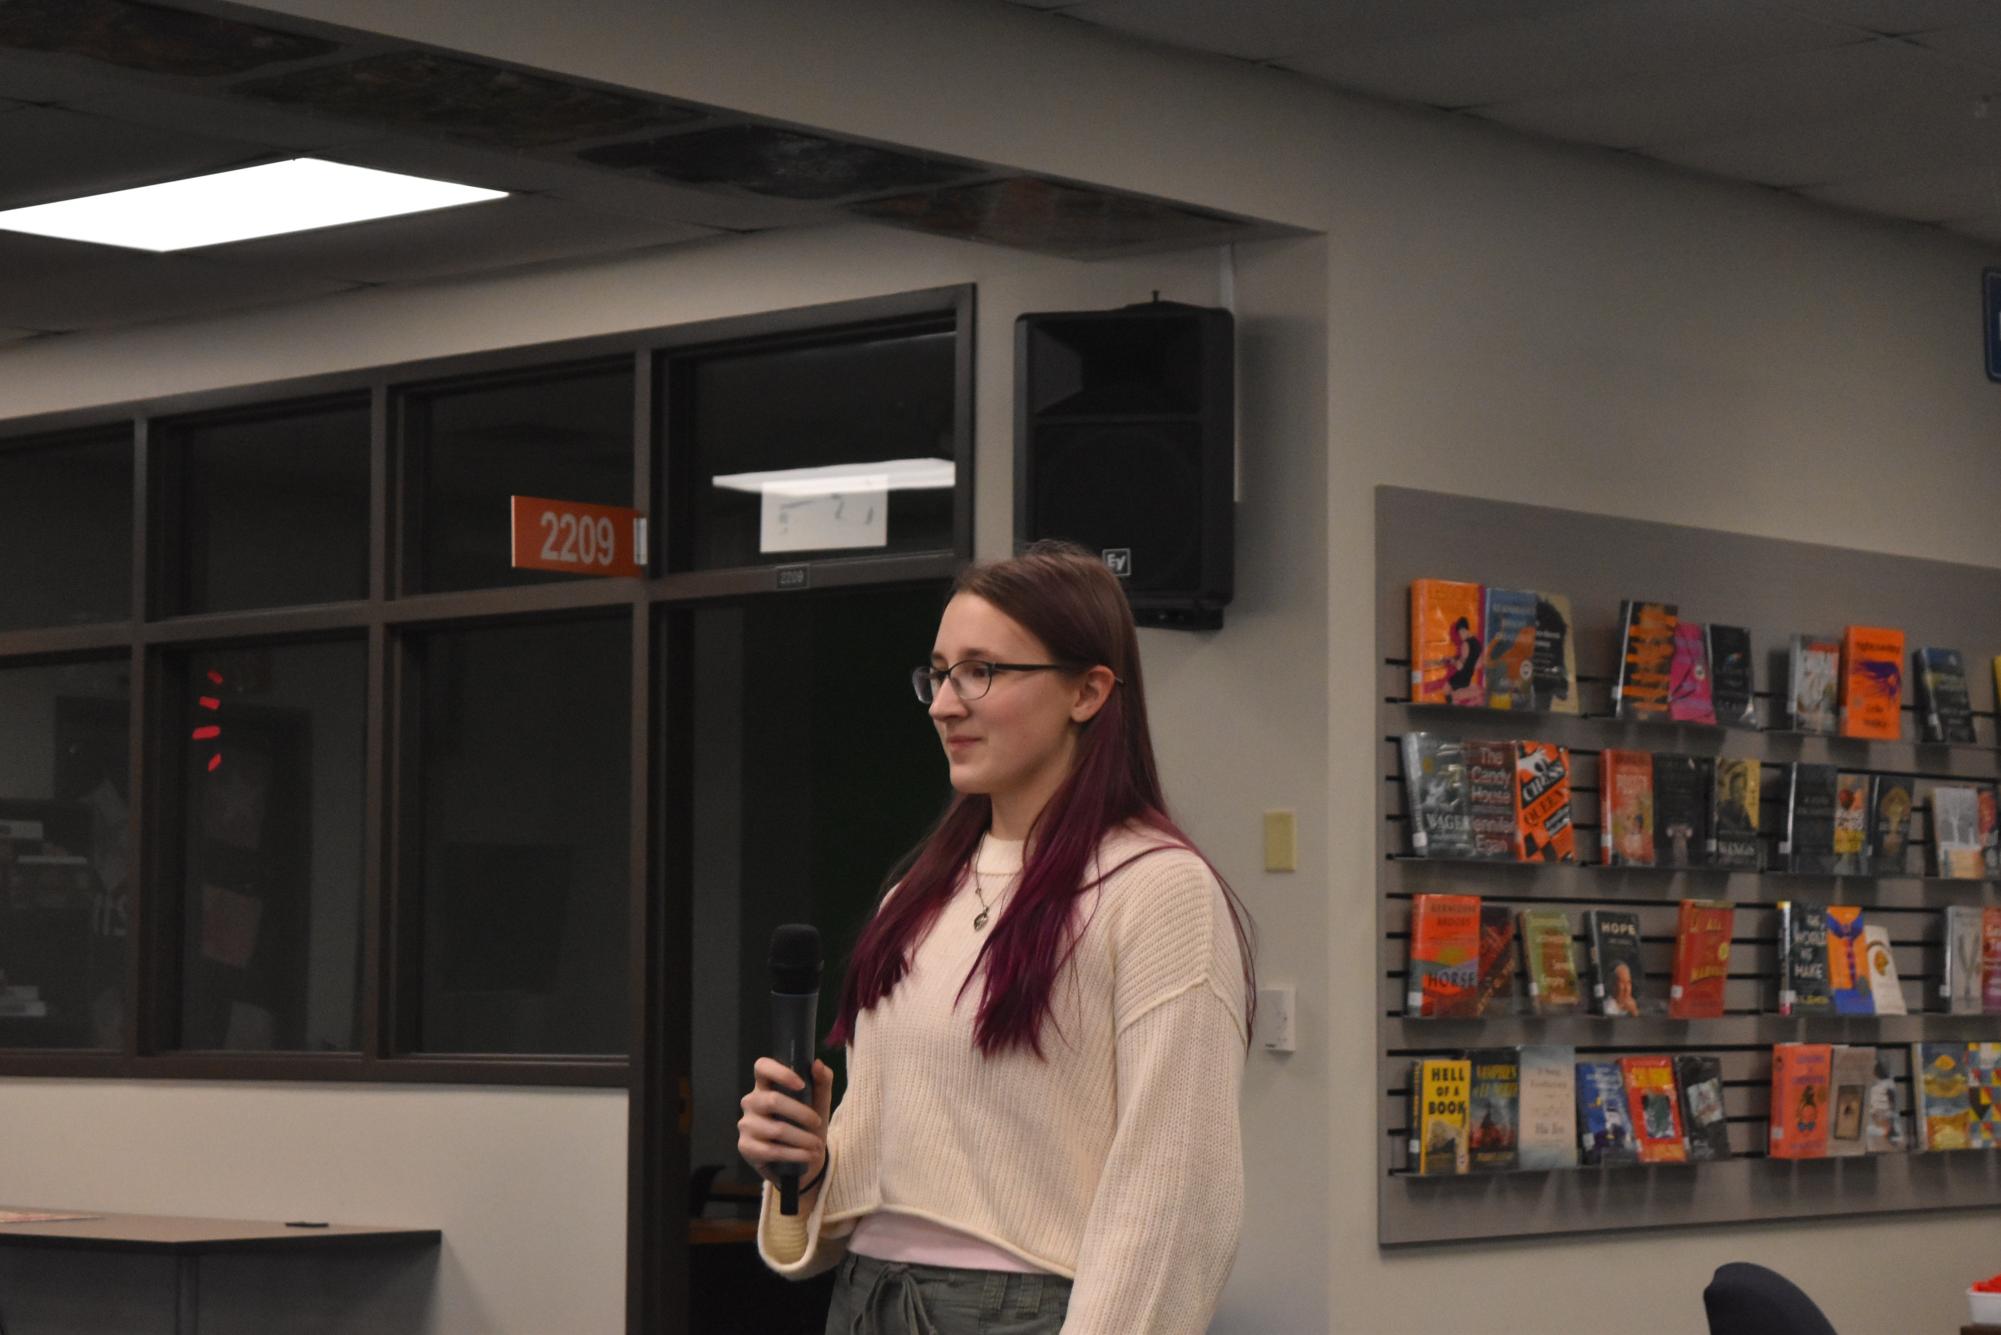 Sophomore Victoria Gold holds a microphone and stands in the library, looking out towards the judges as she faces the crowd.